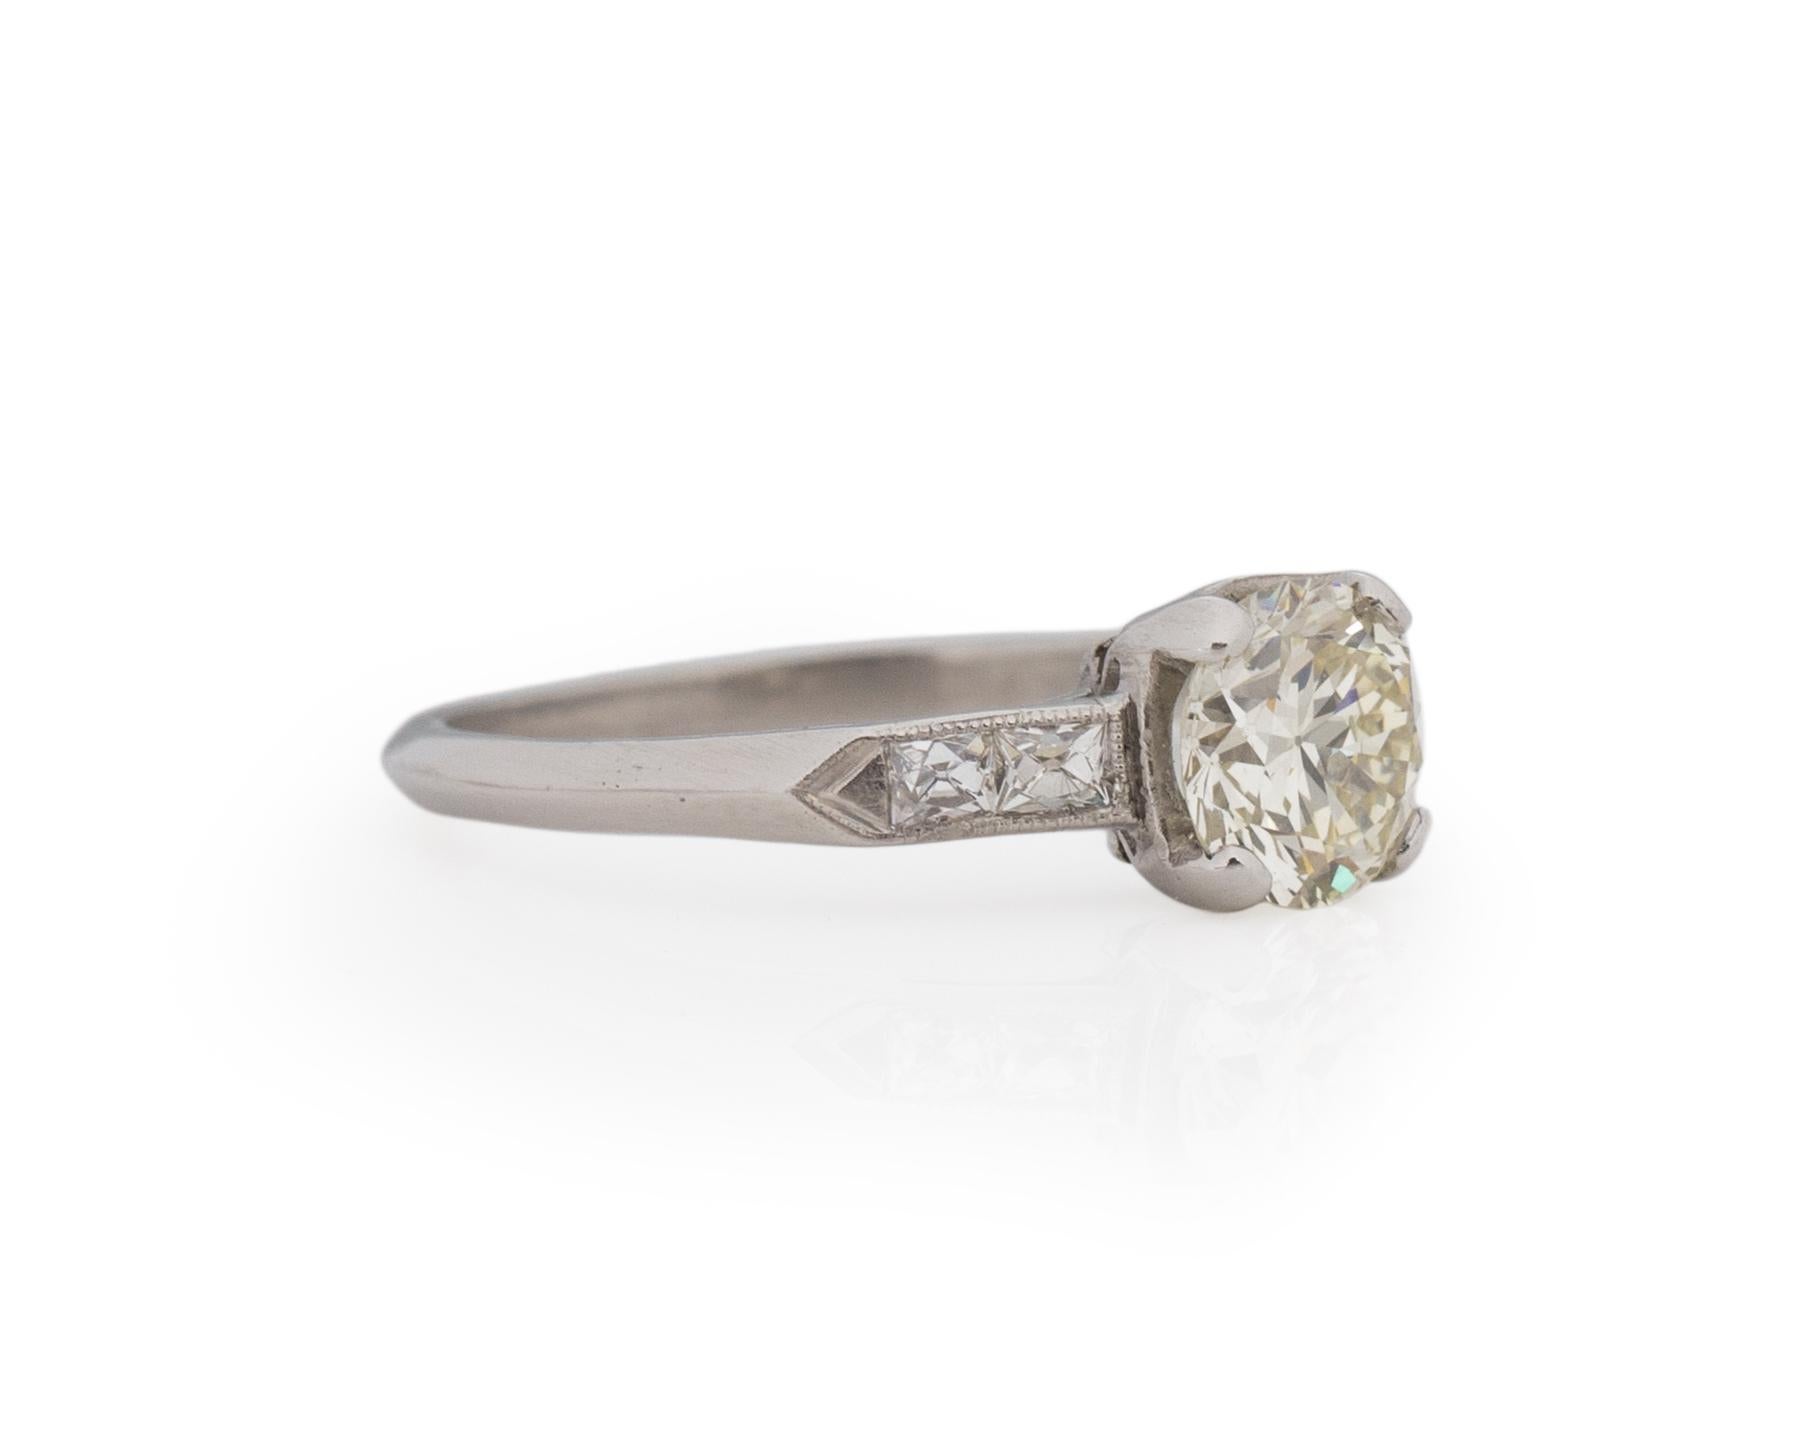 Ring Size: 6.75
Metal Type: Platinum [Hallmarked, and Tested]
Weight: 3.54 grams

Center Diamond Details:
Weight: 1.02ct
Cut: Old European brilliant
Color: O/P
Clarity: VS

Finger to Top of Stone Measurement: 5mm
Condition: Excellent